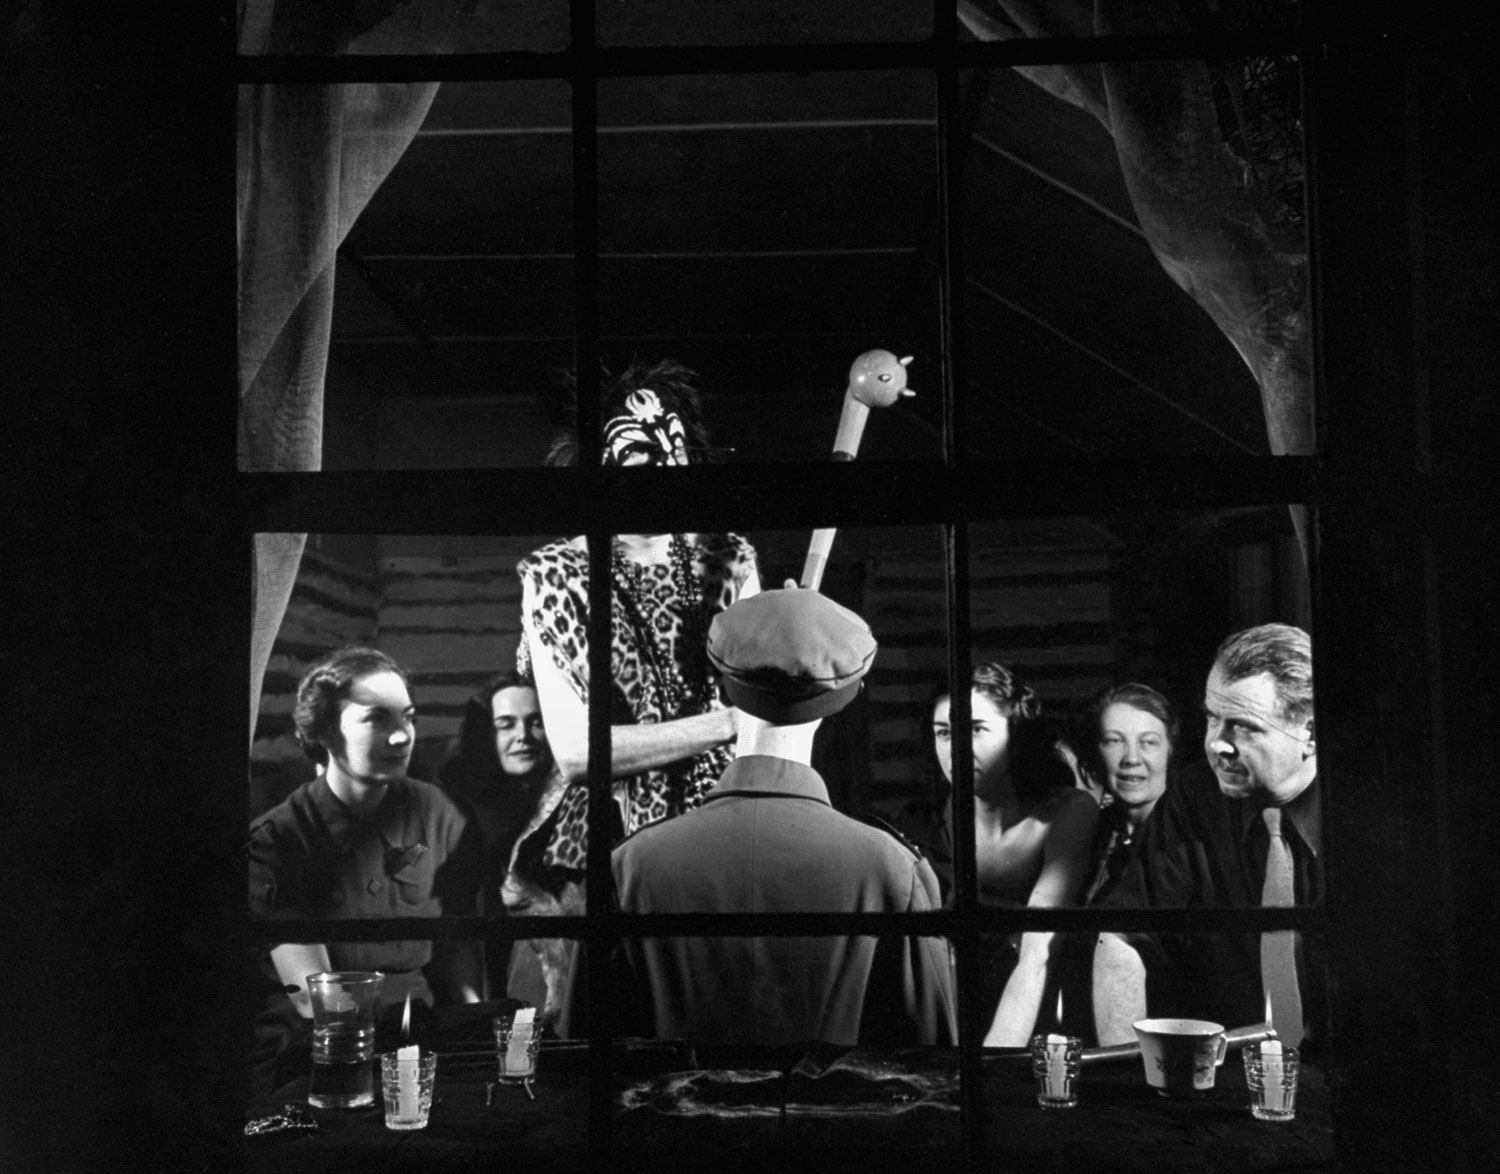 Chief hexer Ted Caldwell intones an incantation. On the right, in dark shirt and tie, is author William Seabrook. Hitler's effigy sits with its back to the window.